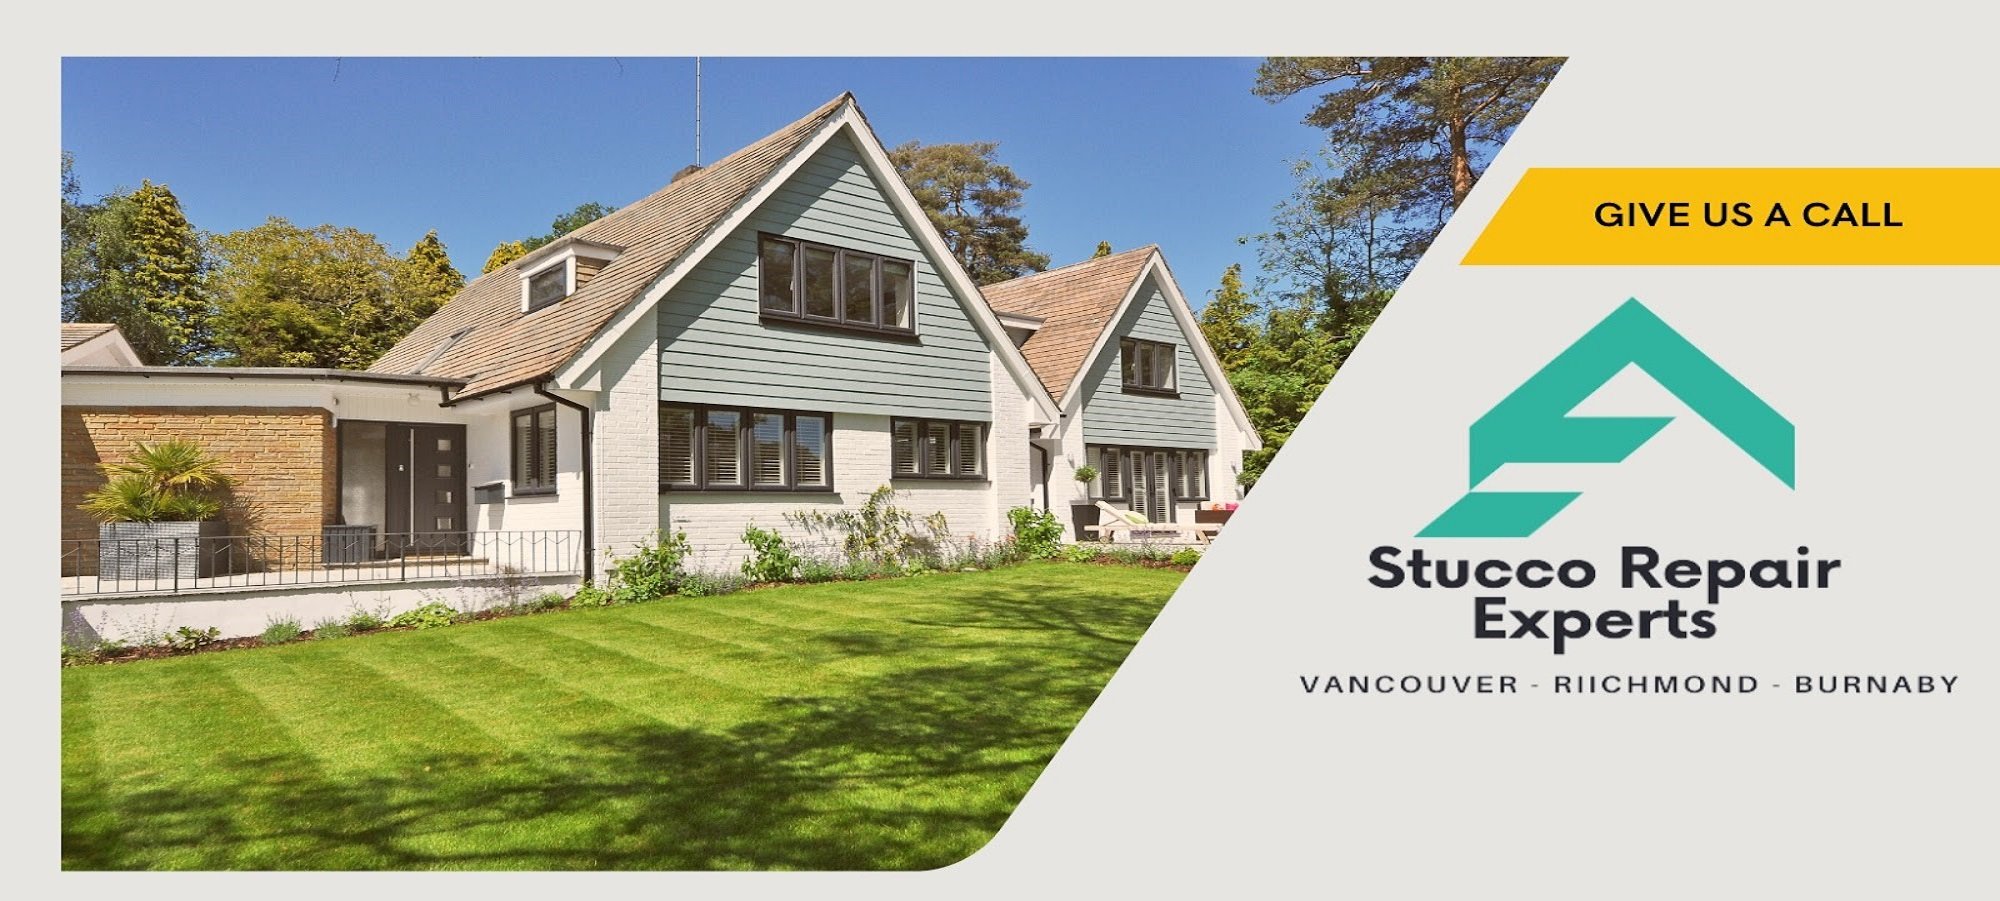 Stucco Repair Experts Vancouver cover